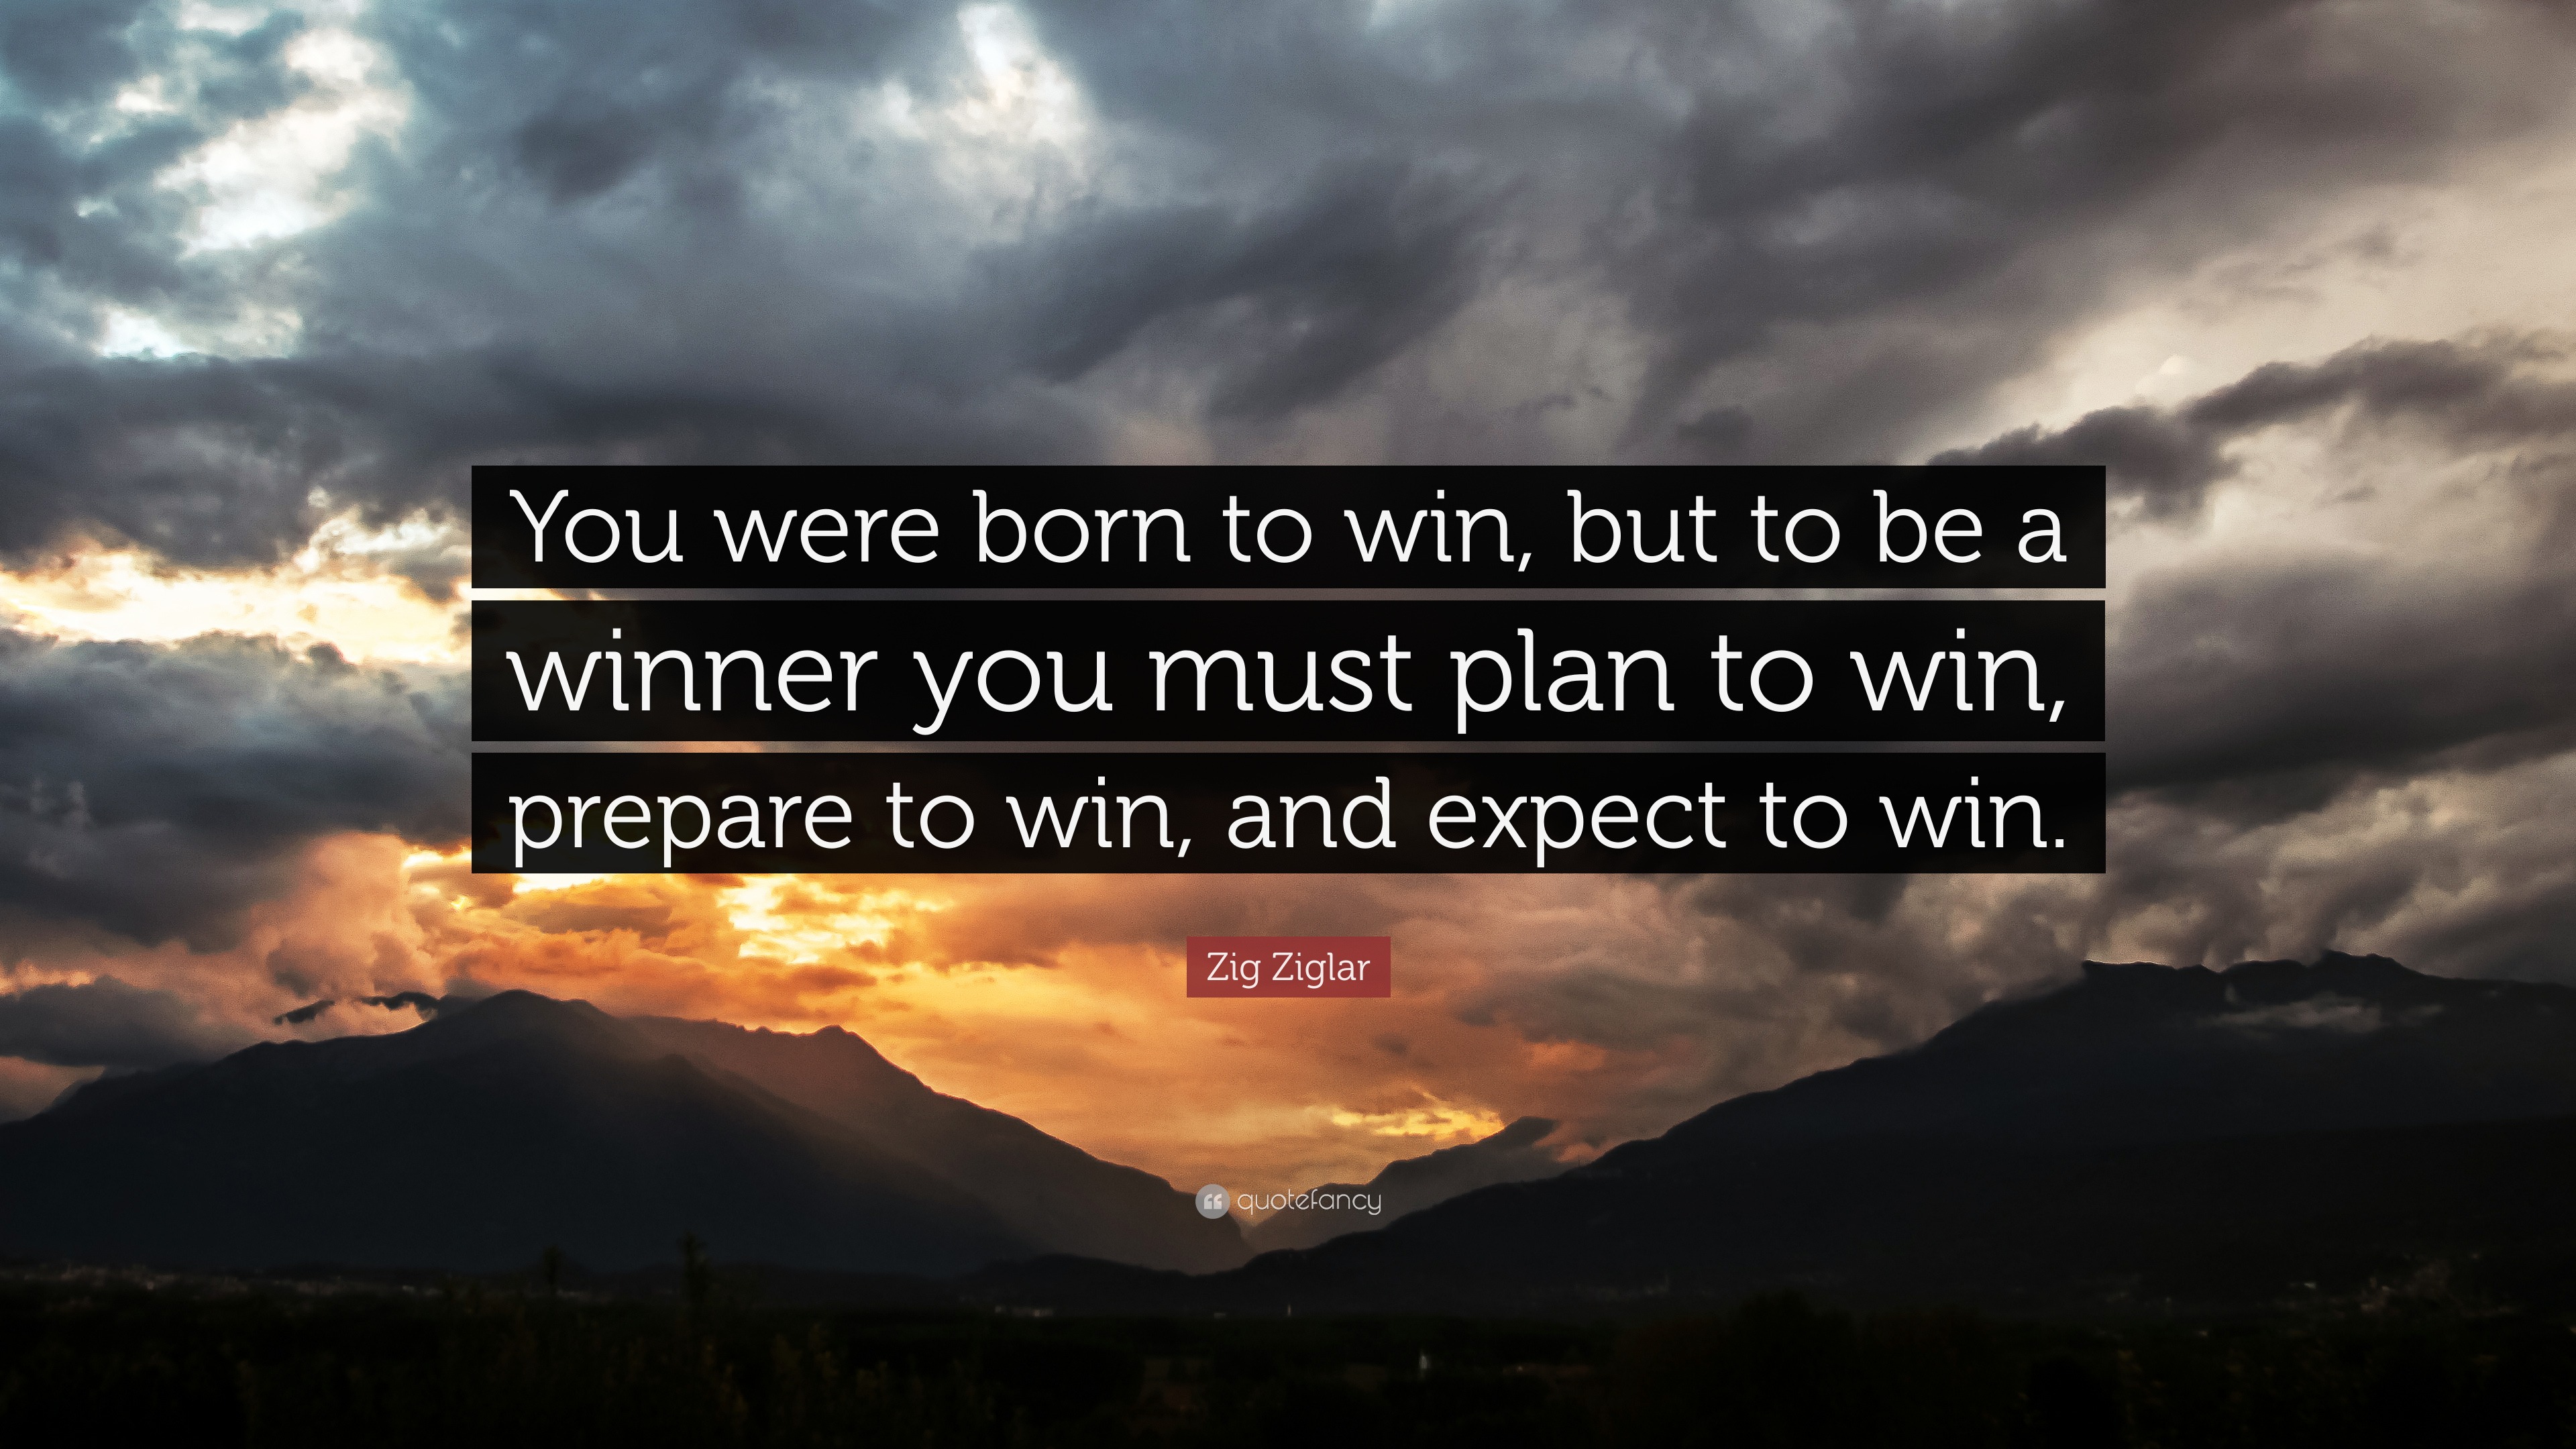 Zig Ziglar Quote: “You were born to win, but to be a winner you must ...